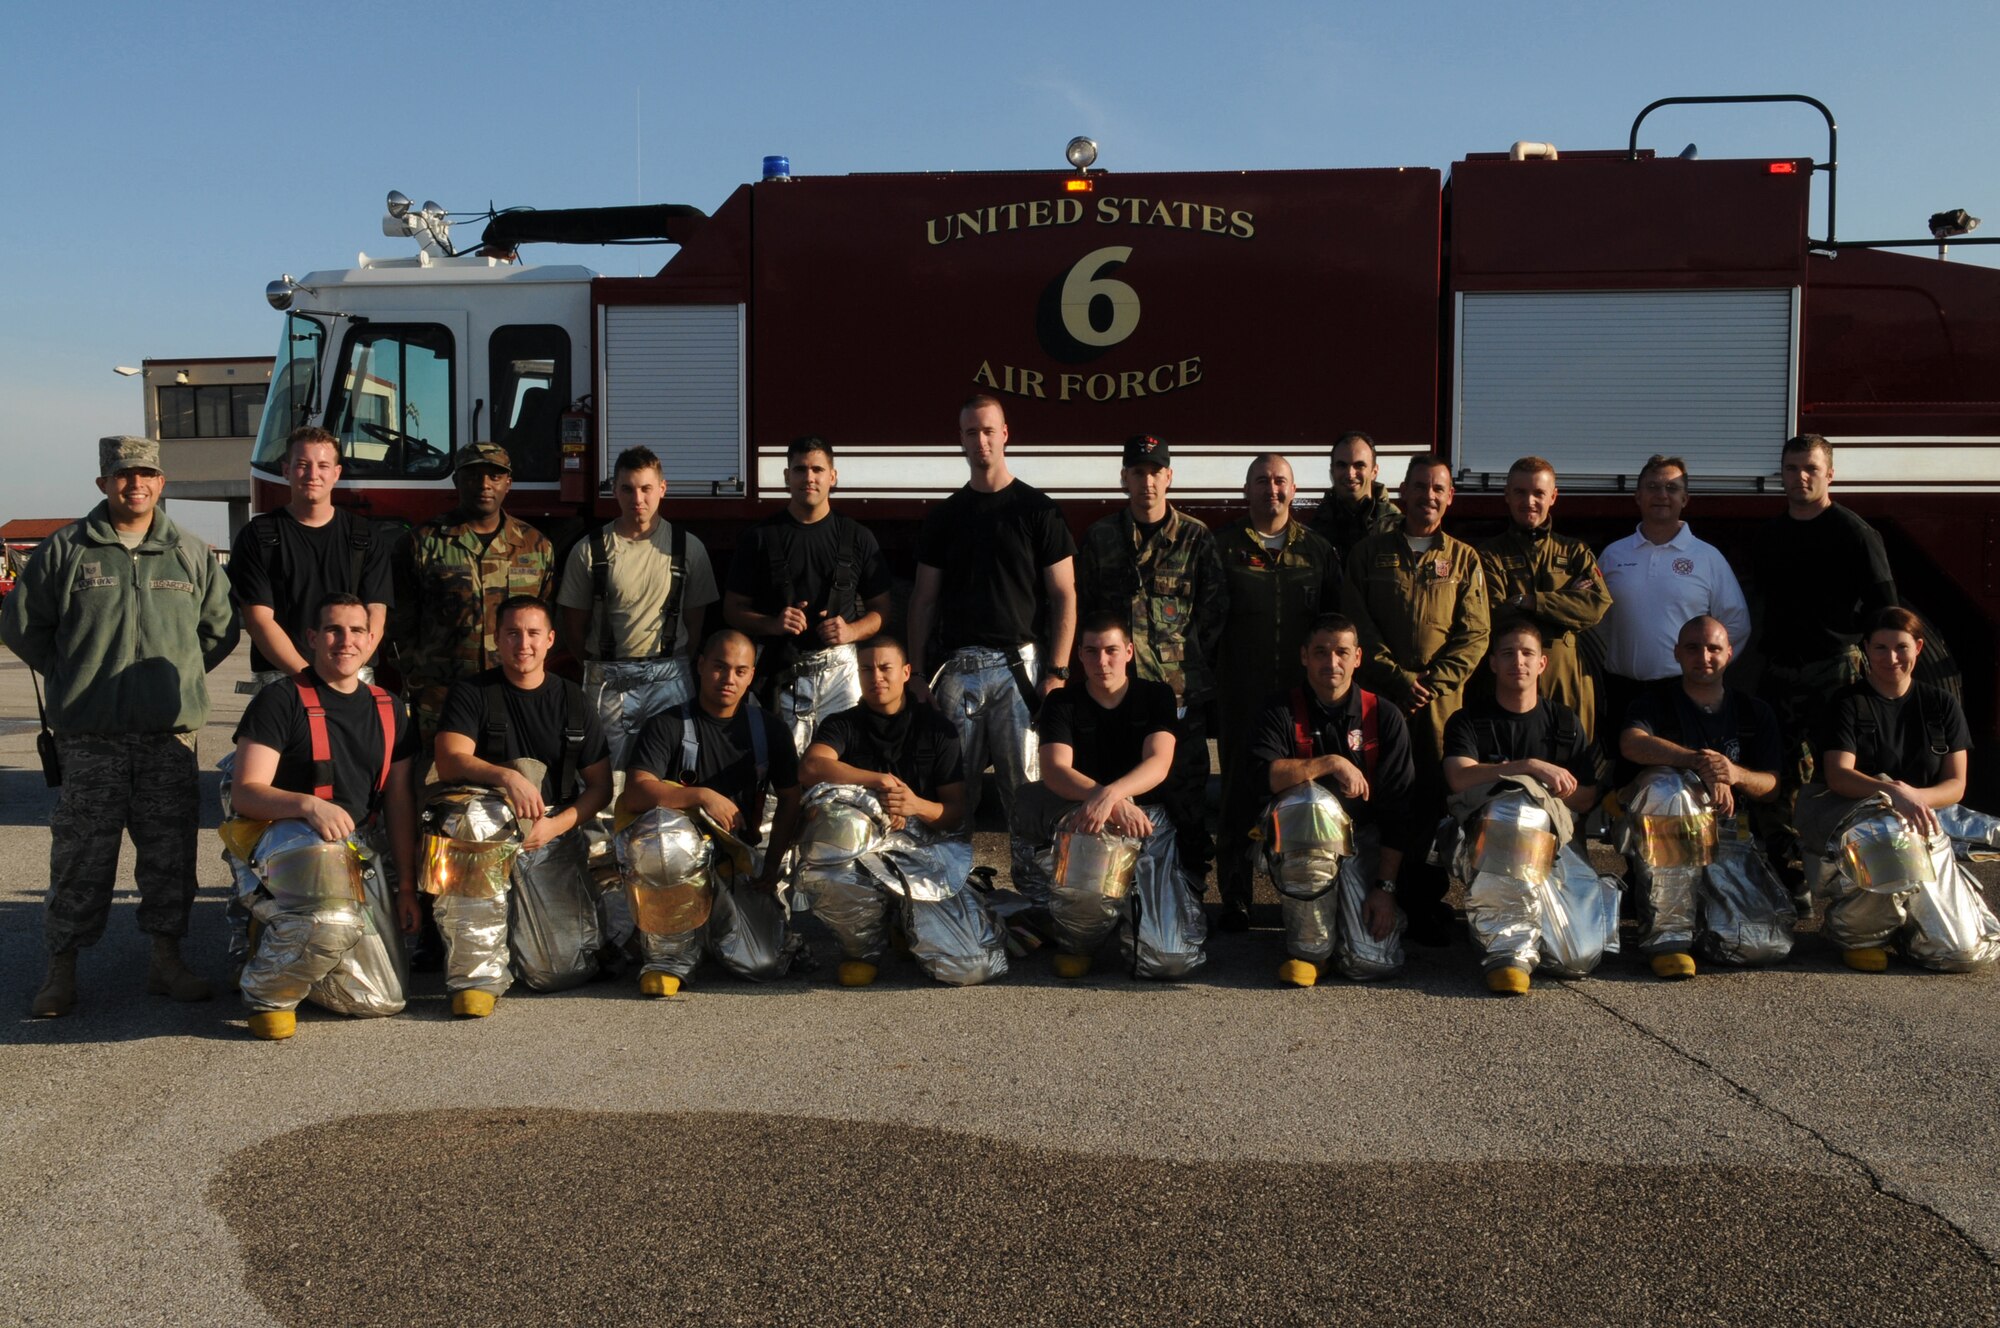 Firefighters from the 31st Civil Engineer Squadron take a group photo with Italian Air Force firefighters from Decimomannu Air Base, Sardinia, Italy following a three-day training course Nov. 11, 2009 at Aviano Air Base, Italy.  The 31st Civil Engineer Squadron hosted a three-day course so that U.S. and Italian Air Force firefighters know the standard operating procedures when conducting a joint response to an F-16 Fighting Falcon aircraft emergency.  The 31st Fighter Wing and other foreign air forces conduct pilot training operations out of Decimomannu AB.
 (U.S. Air Force photo/ Senior Airman Nadine Y. Barclay)